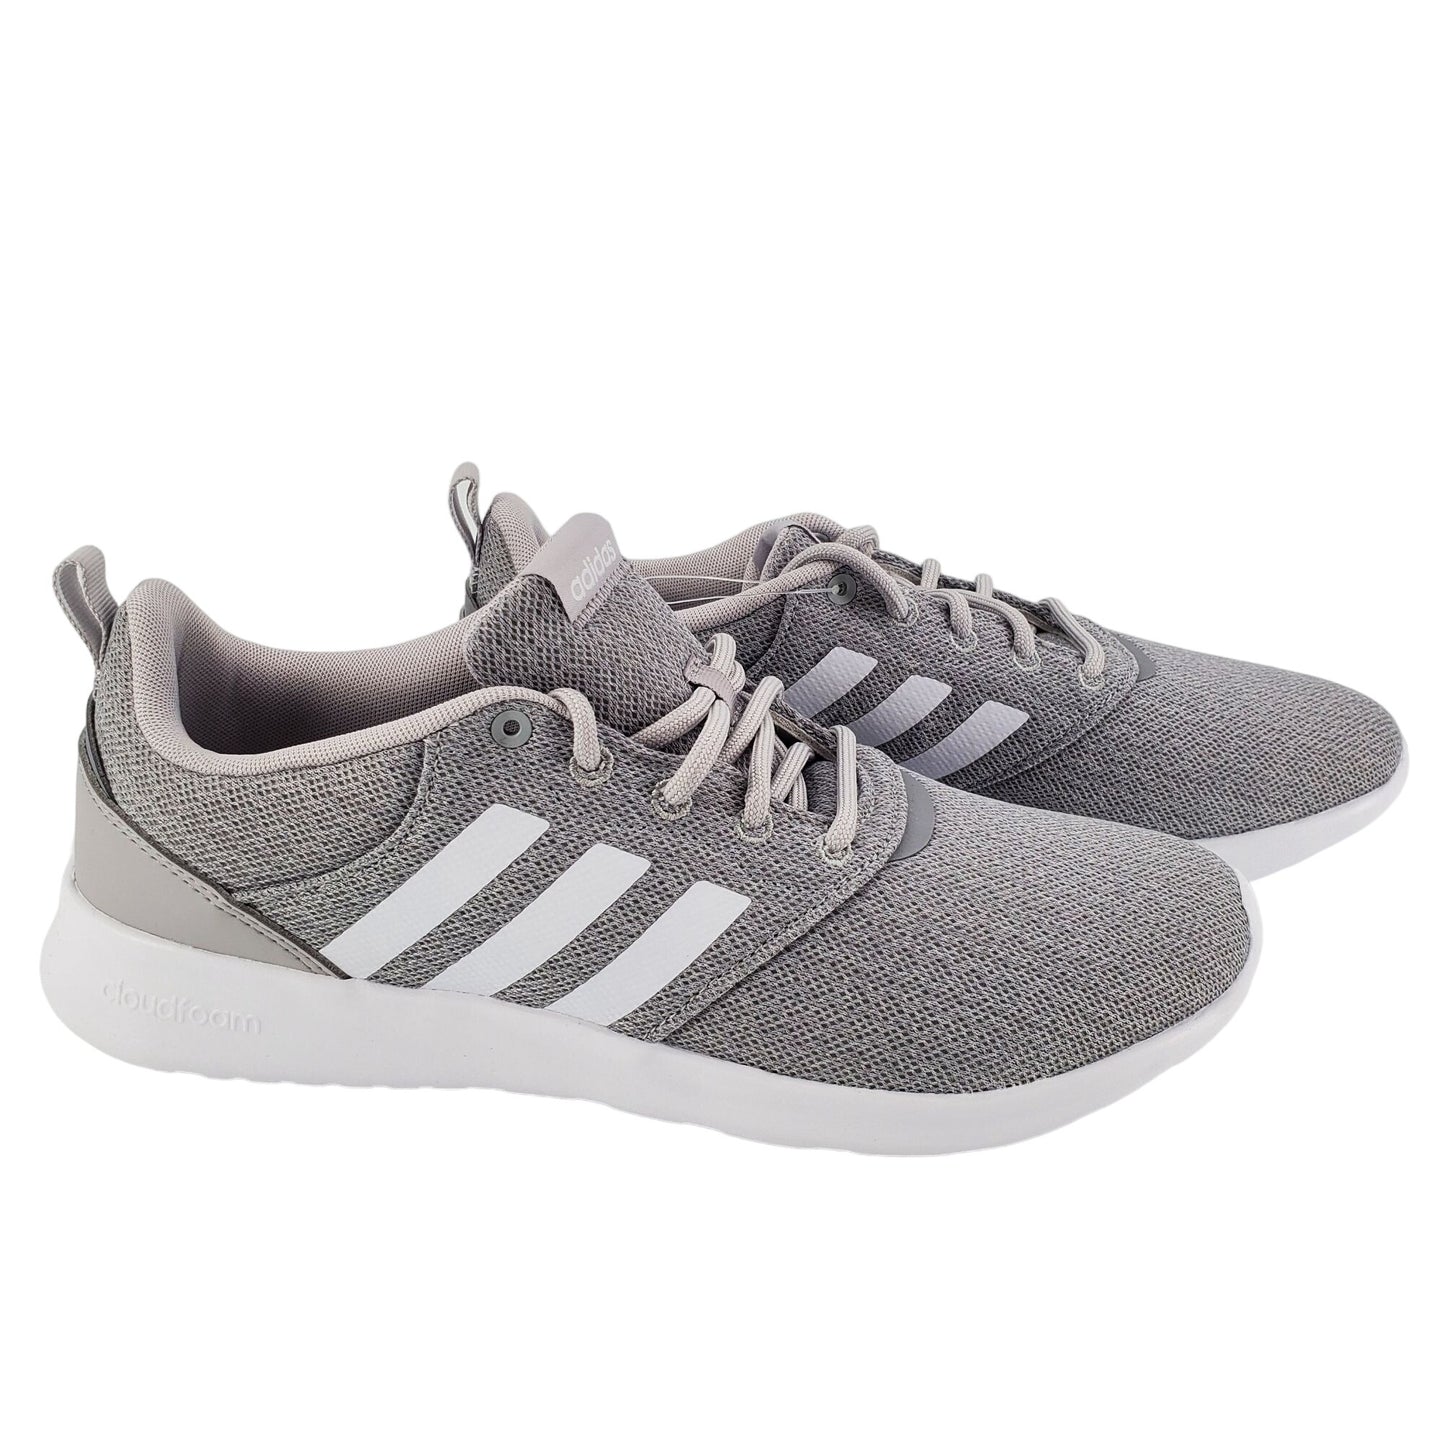 ADIDAS Sneakers Woman’s 10 Cloudfoam QT Racer 2.0 Activewear Athletic Shoes Gray